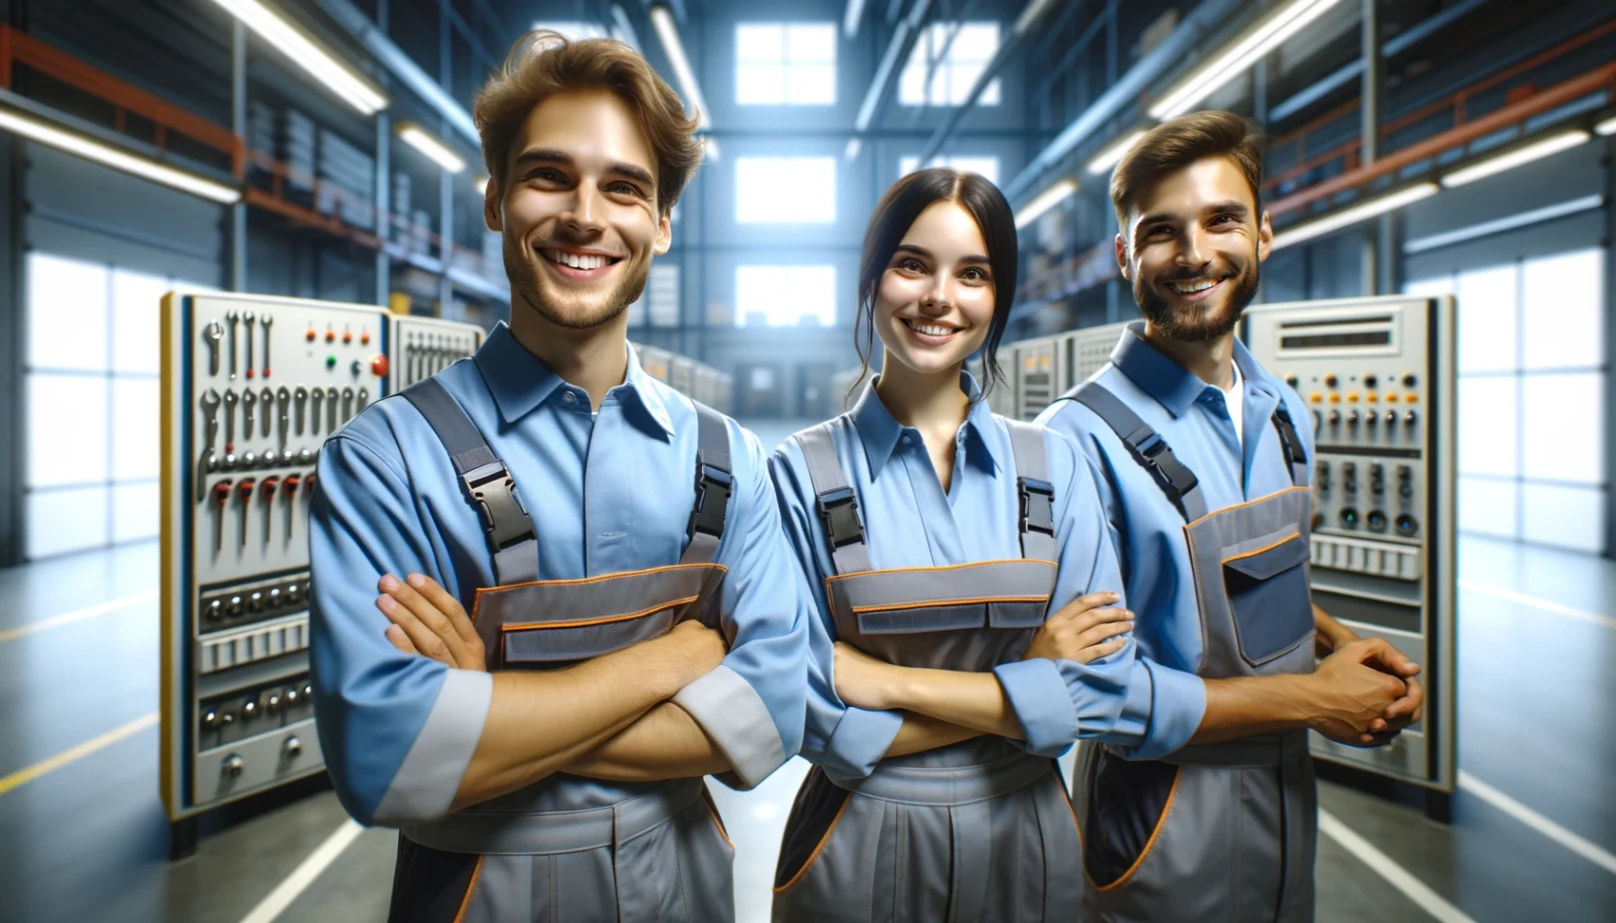 Jobs in Facility Management: Earn $60,000+ Annually, 40 Hour Work Weeks With Full Benefits